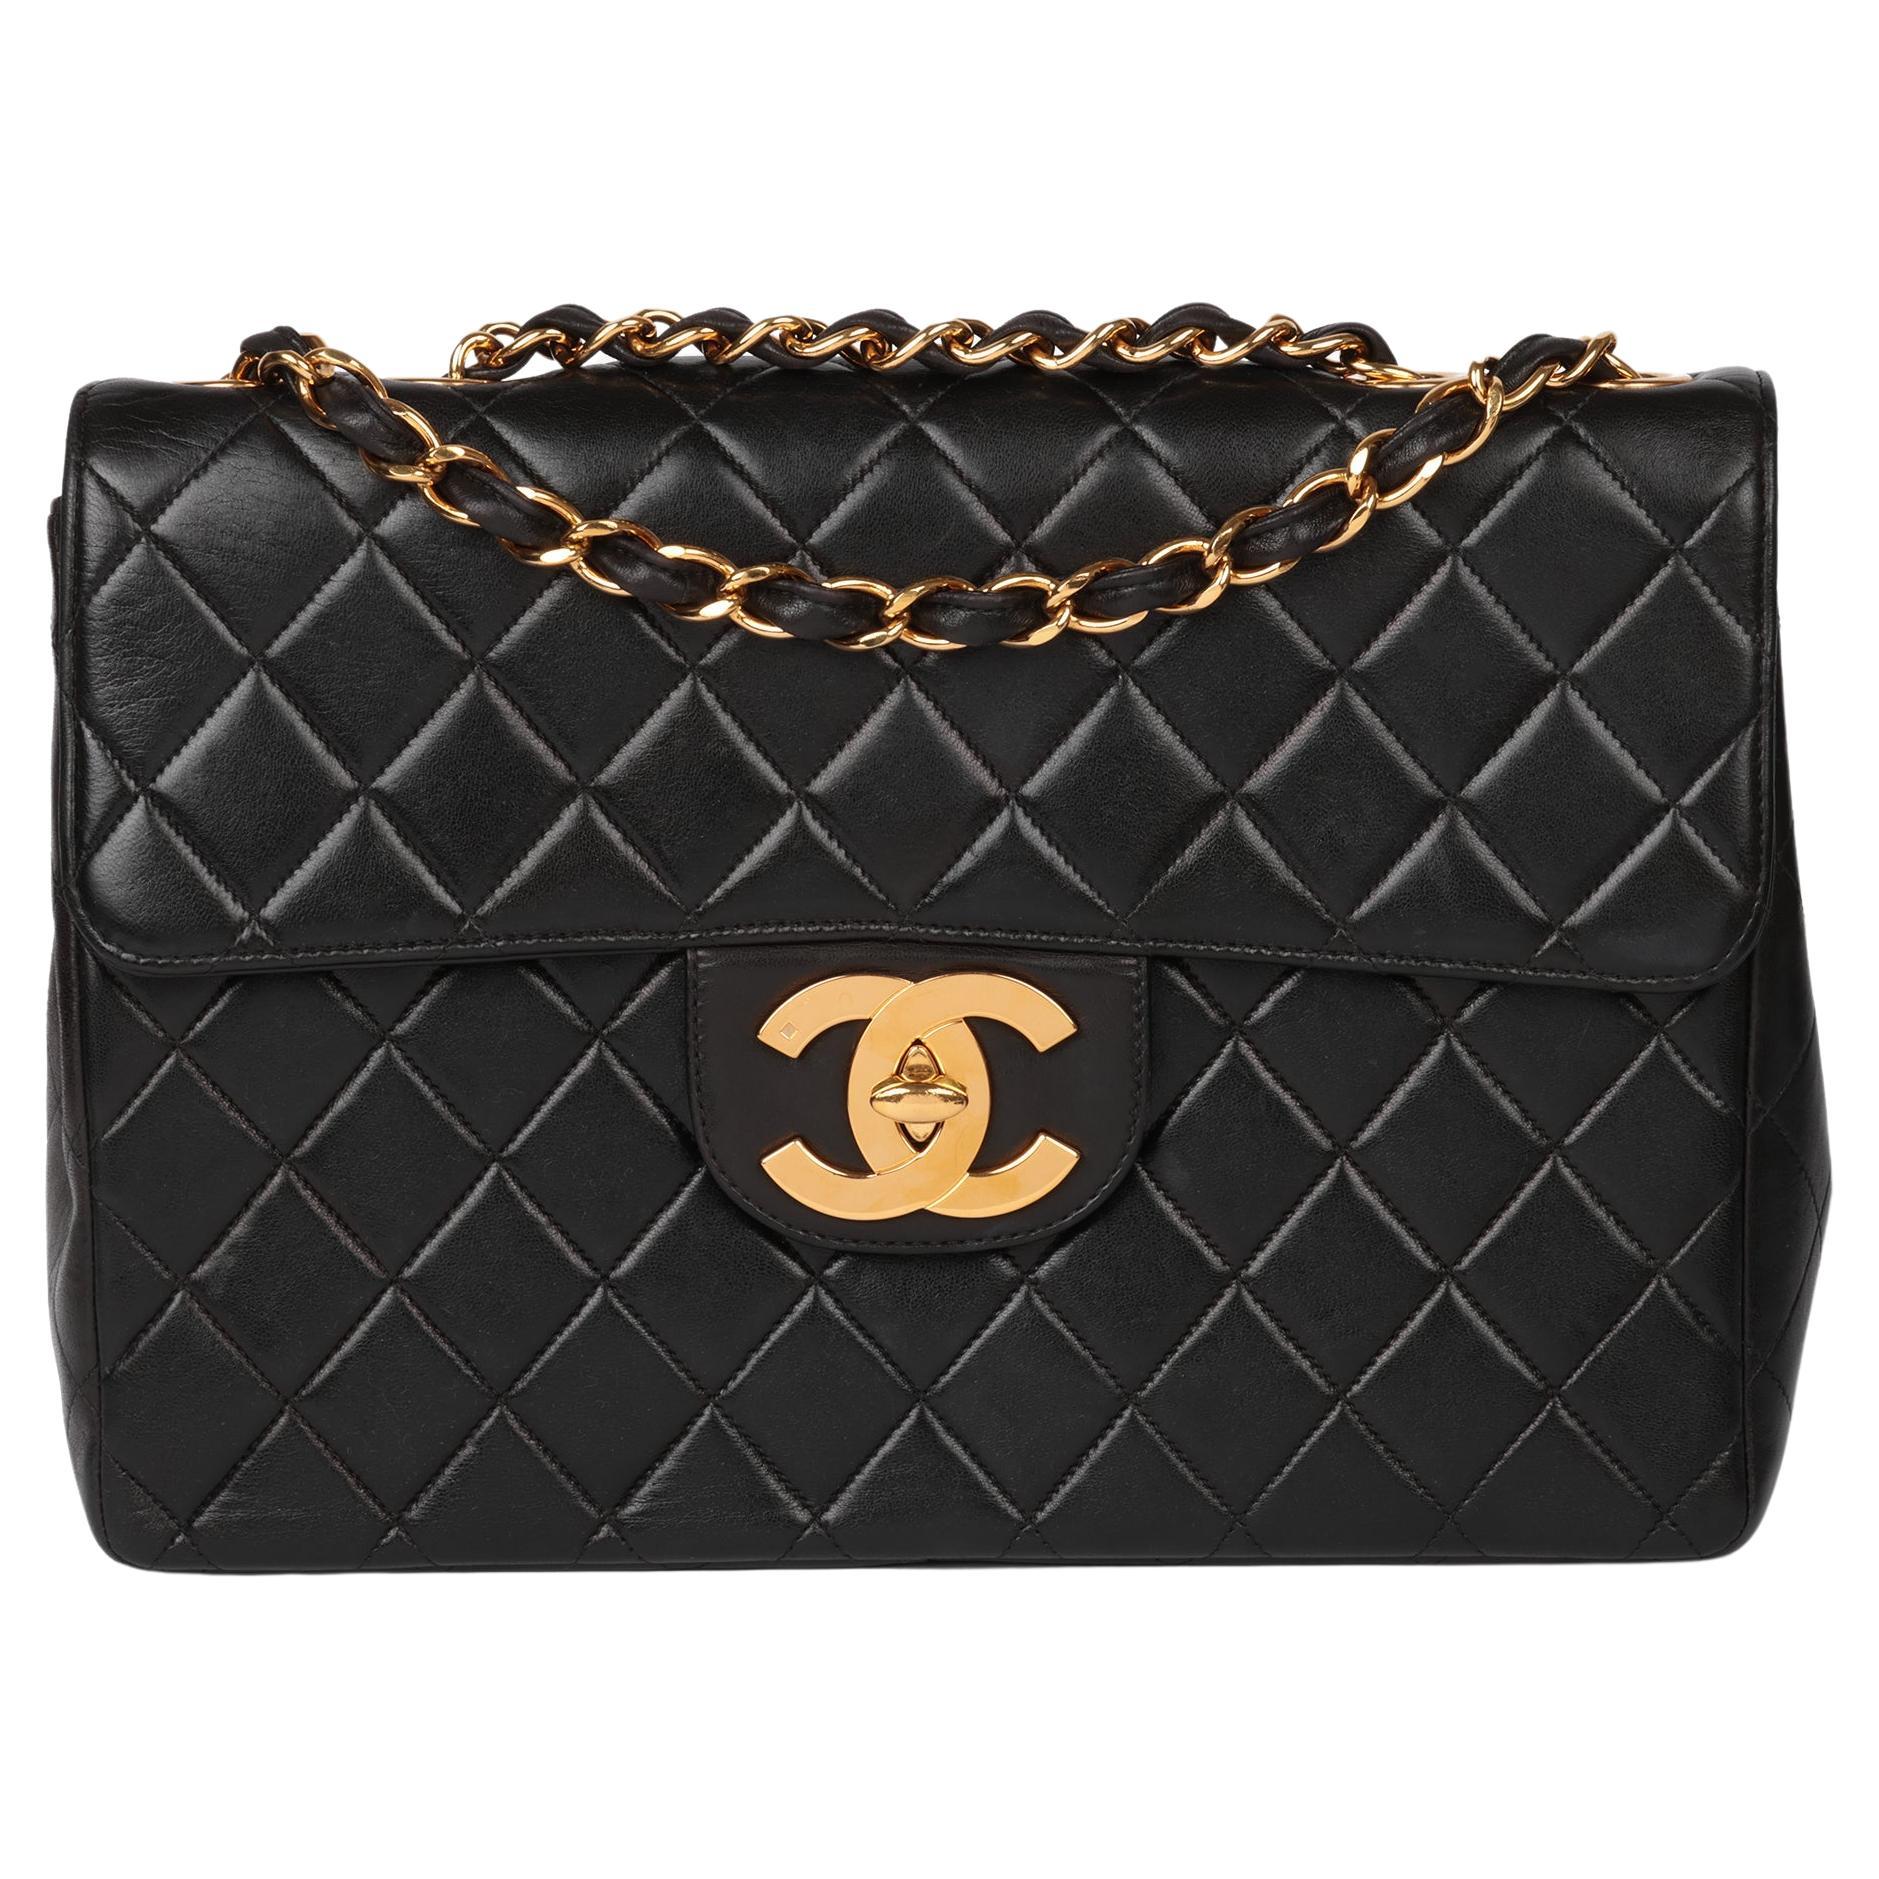 SOLD - FULL SET CHANEL VINTAGE BLACK QUILTED LAMBSKIN 24K GOLD CHAIN CC  CHARM TOTE BAG - My Dreamz Closet